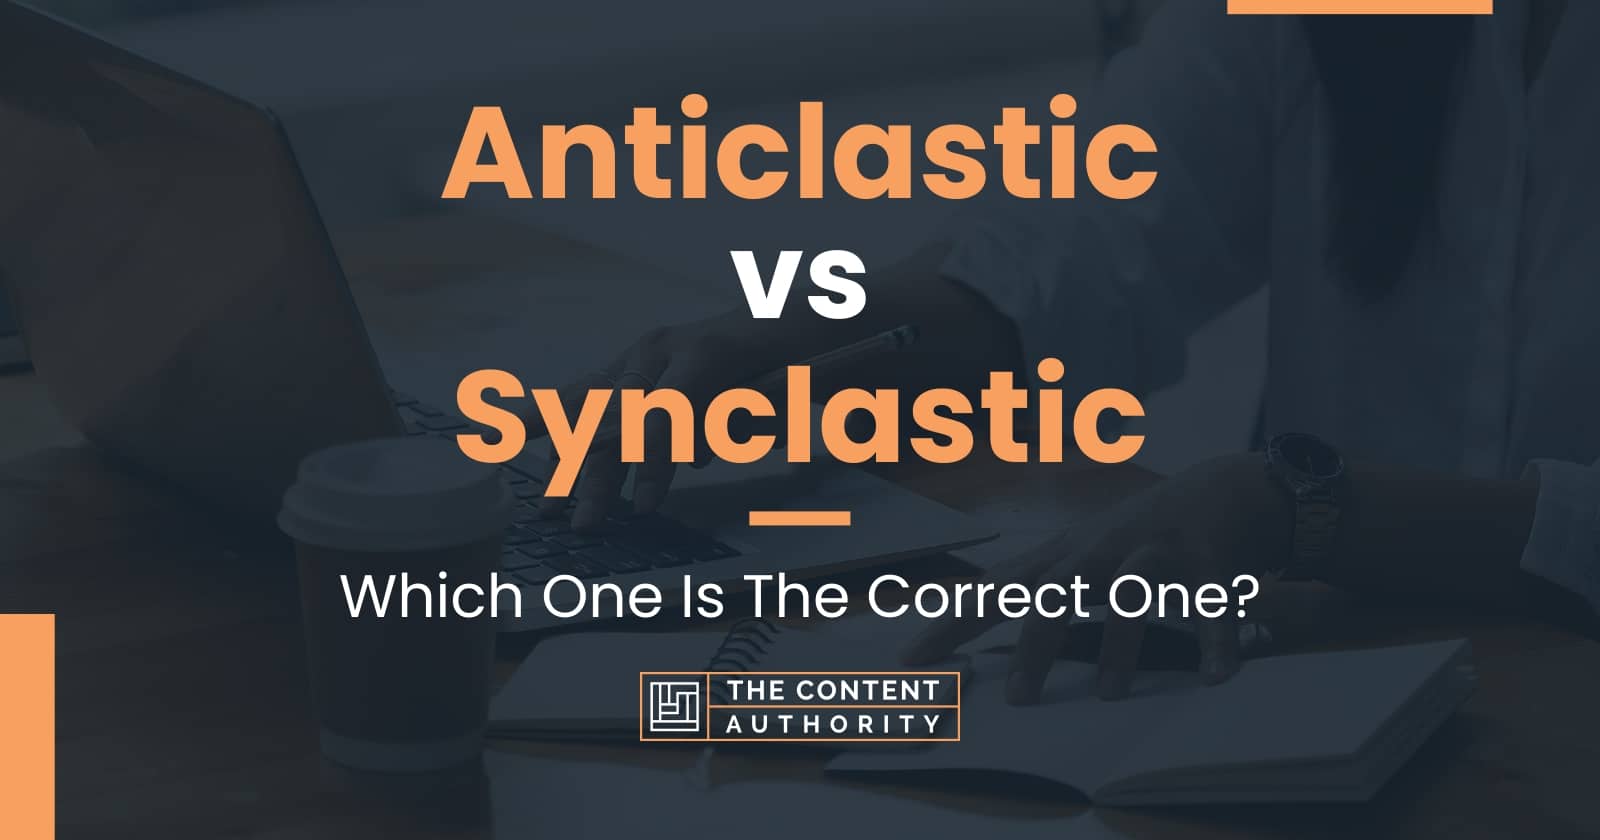 Anticlastic vs Synclastic: Which One Is The Correct One?